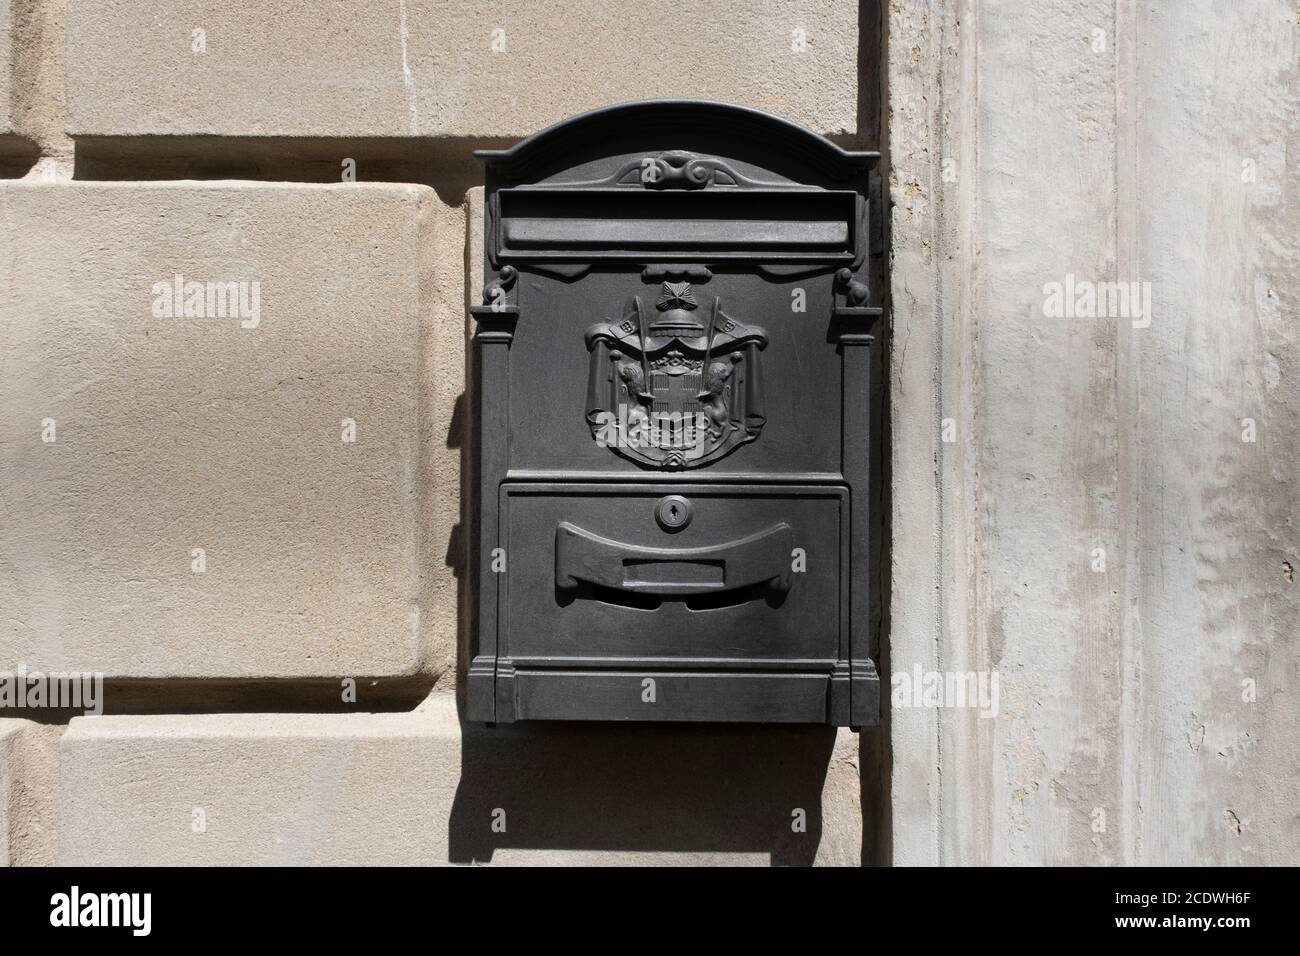 Old Italian mailbox on the wall. Cassetta per le lettere means letterbox,  Regie poste means royal post Stock Photo - Alamy